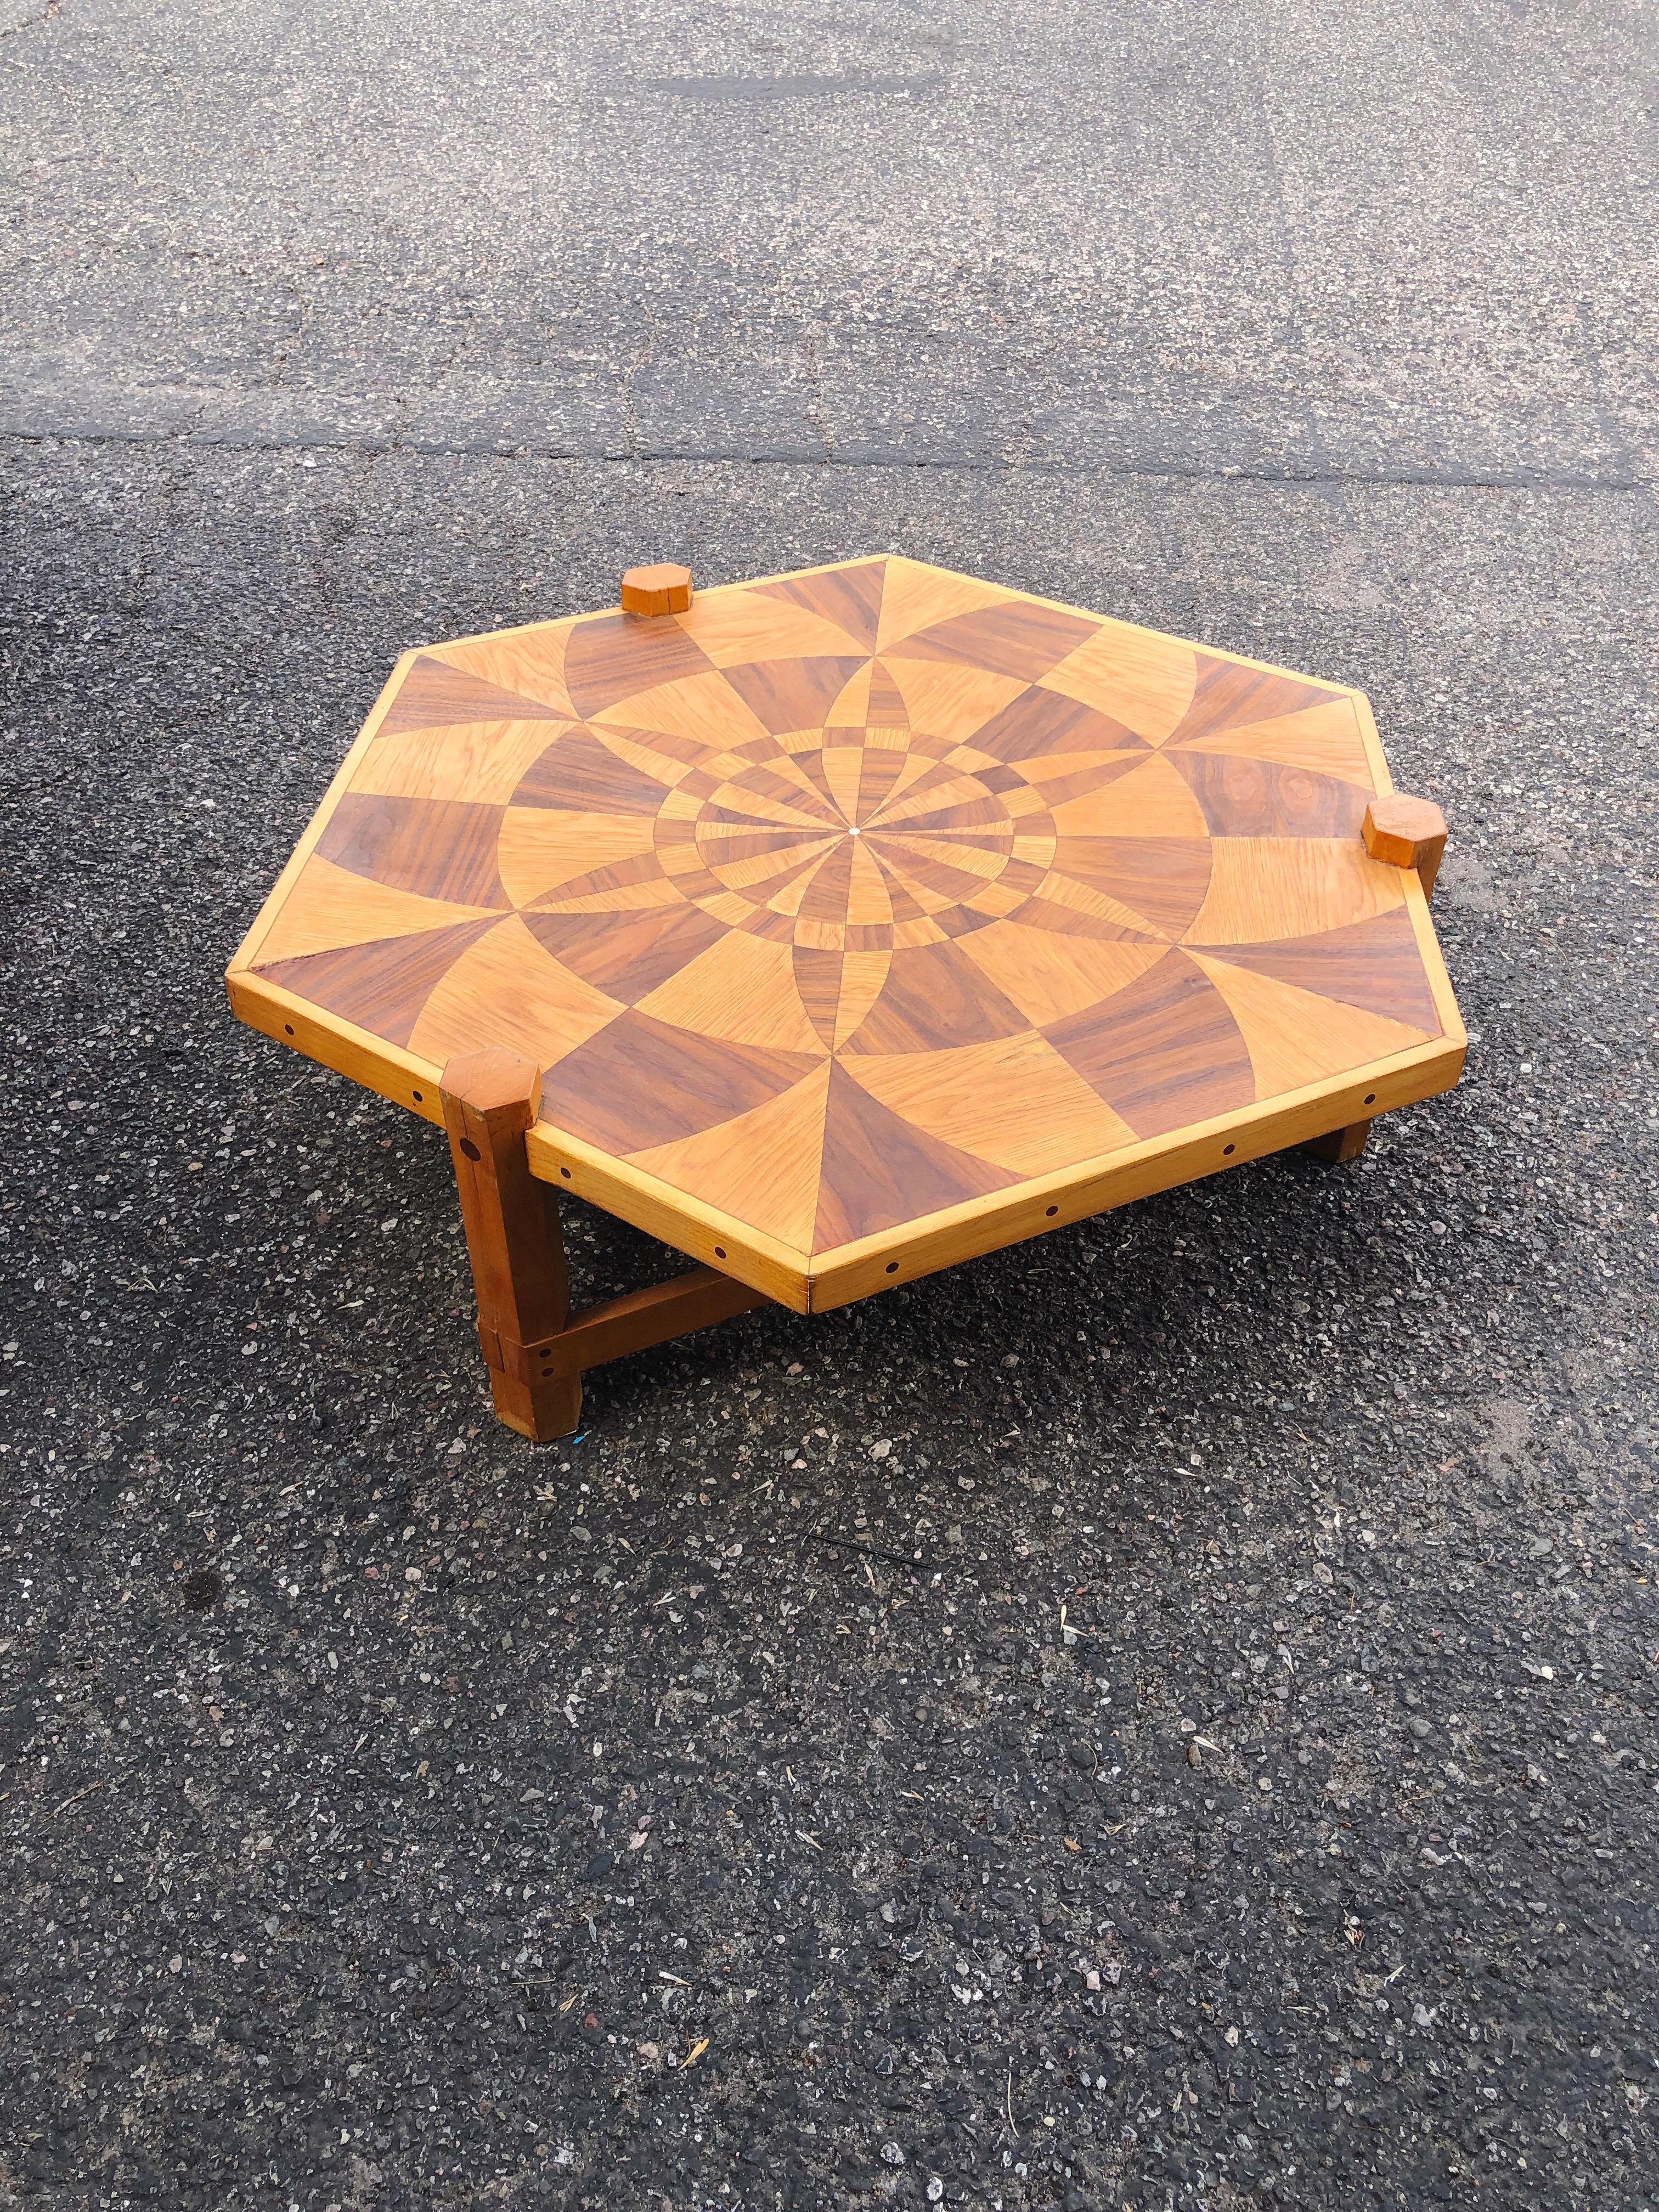 Modernist Marquetry Folk Art Wooden Inlay Coffee Table with Geometric Design In Good Condition For Sale In Clarkdale, AZ